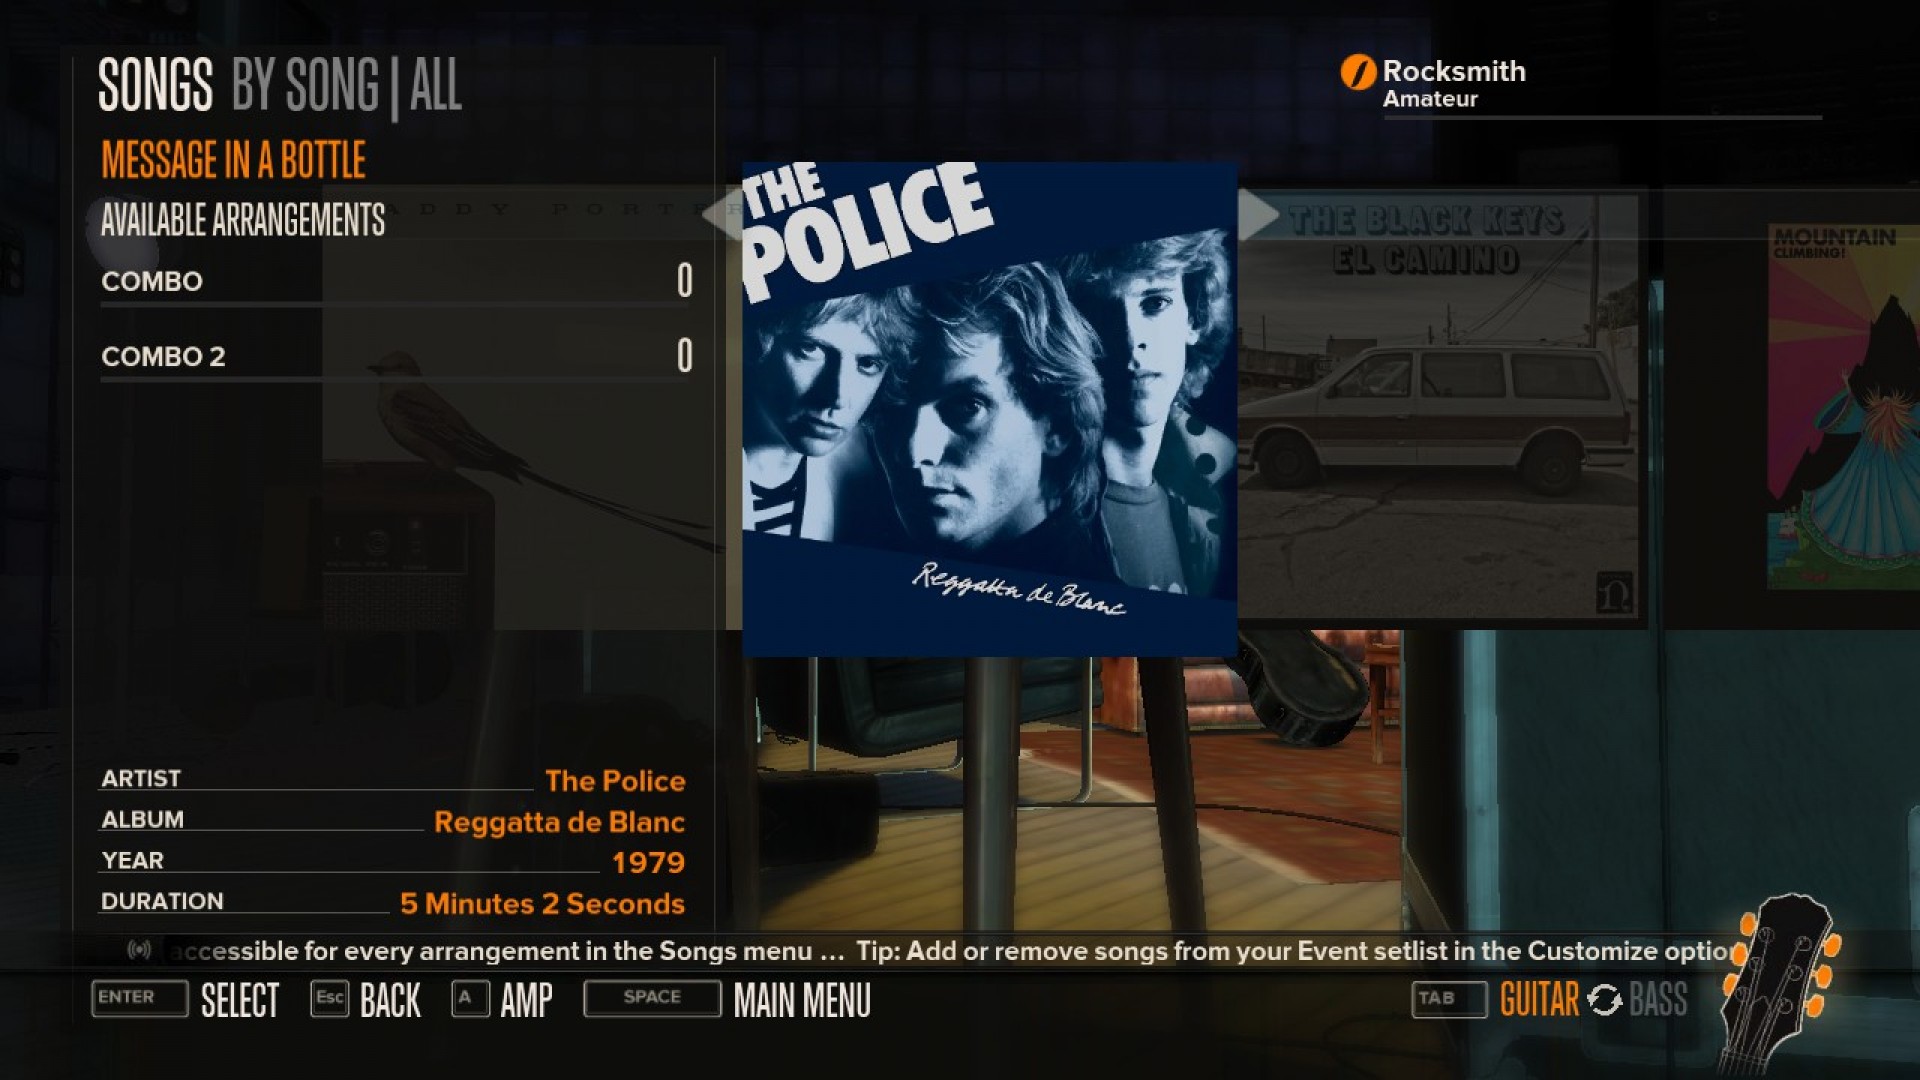 Rocksmith - The Police - Message In A Bottle screenshot